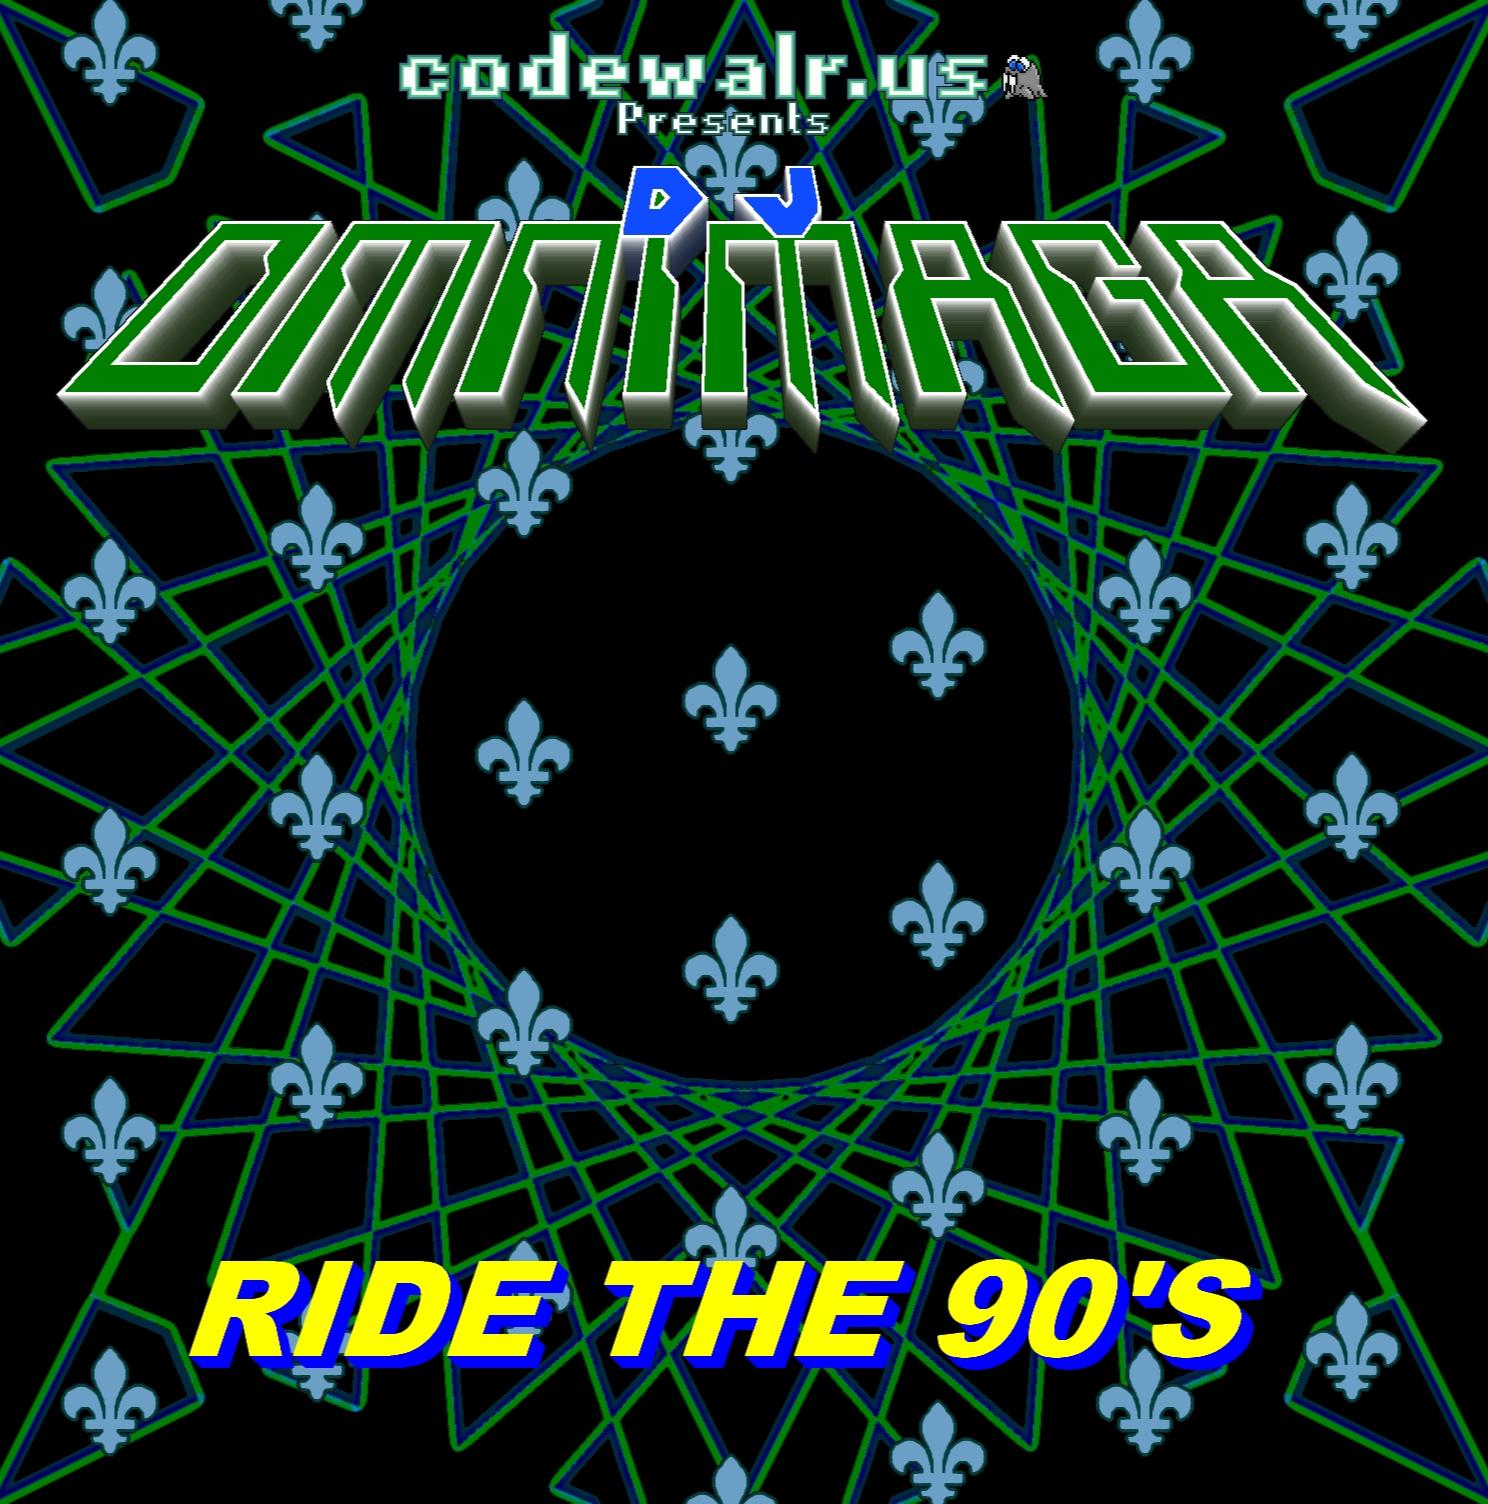 Ride the 90's